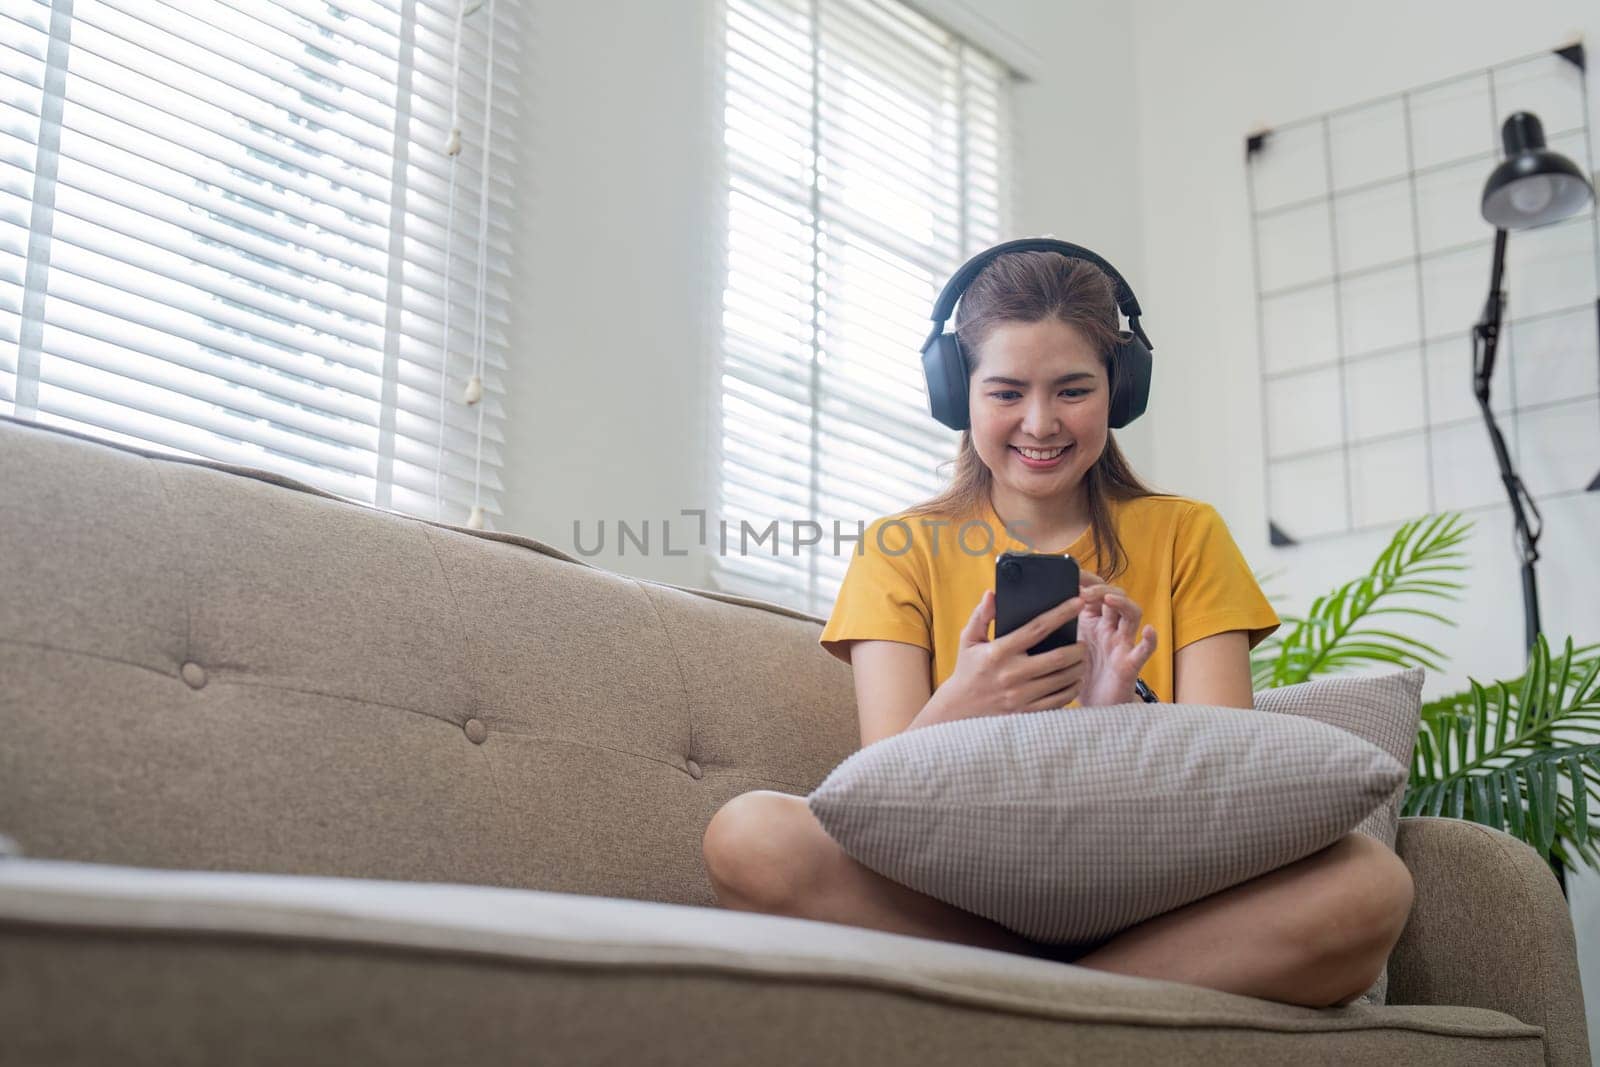 A young woman wearing headphones, sitting on a sofa, and enjoying music on her smartphone in a bright and modern living room.